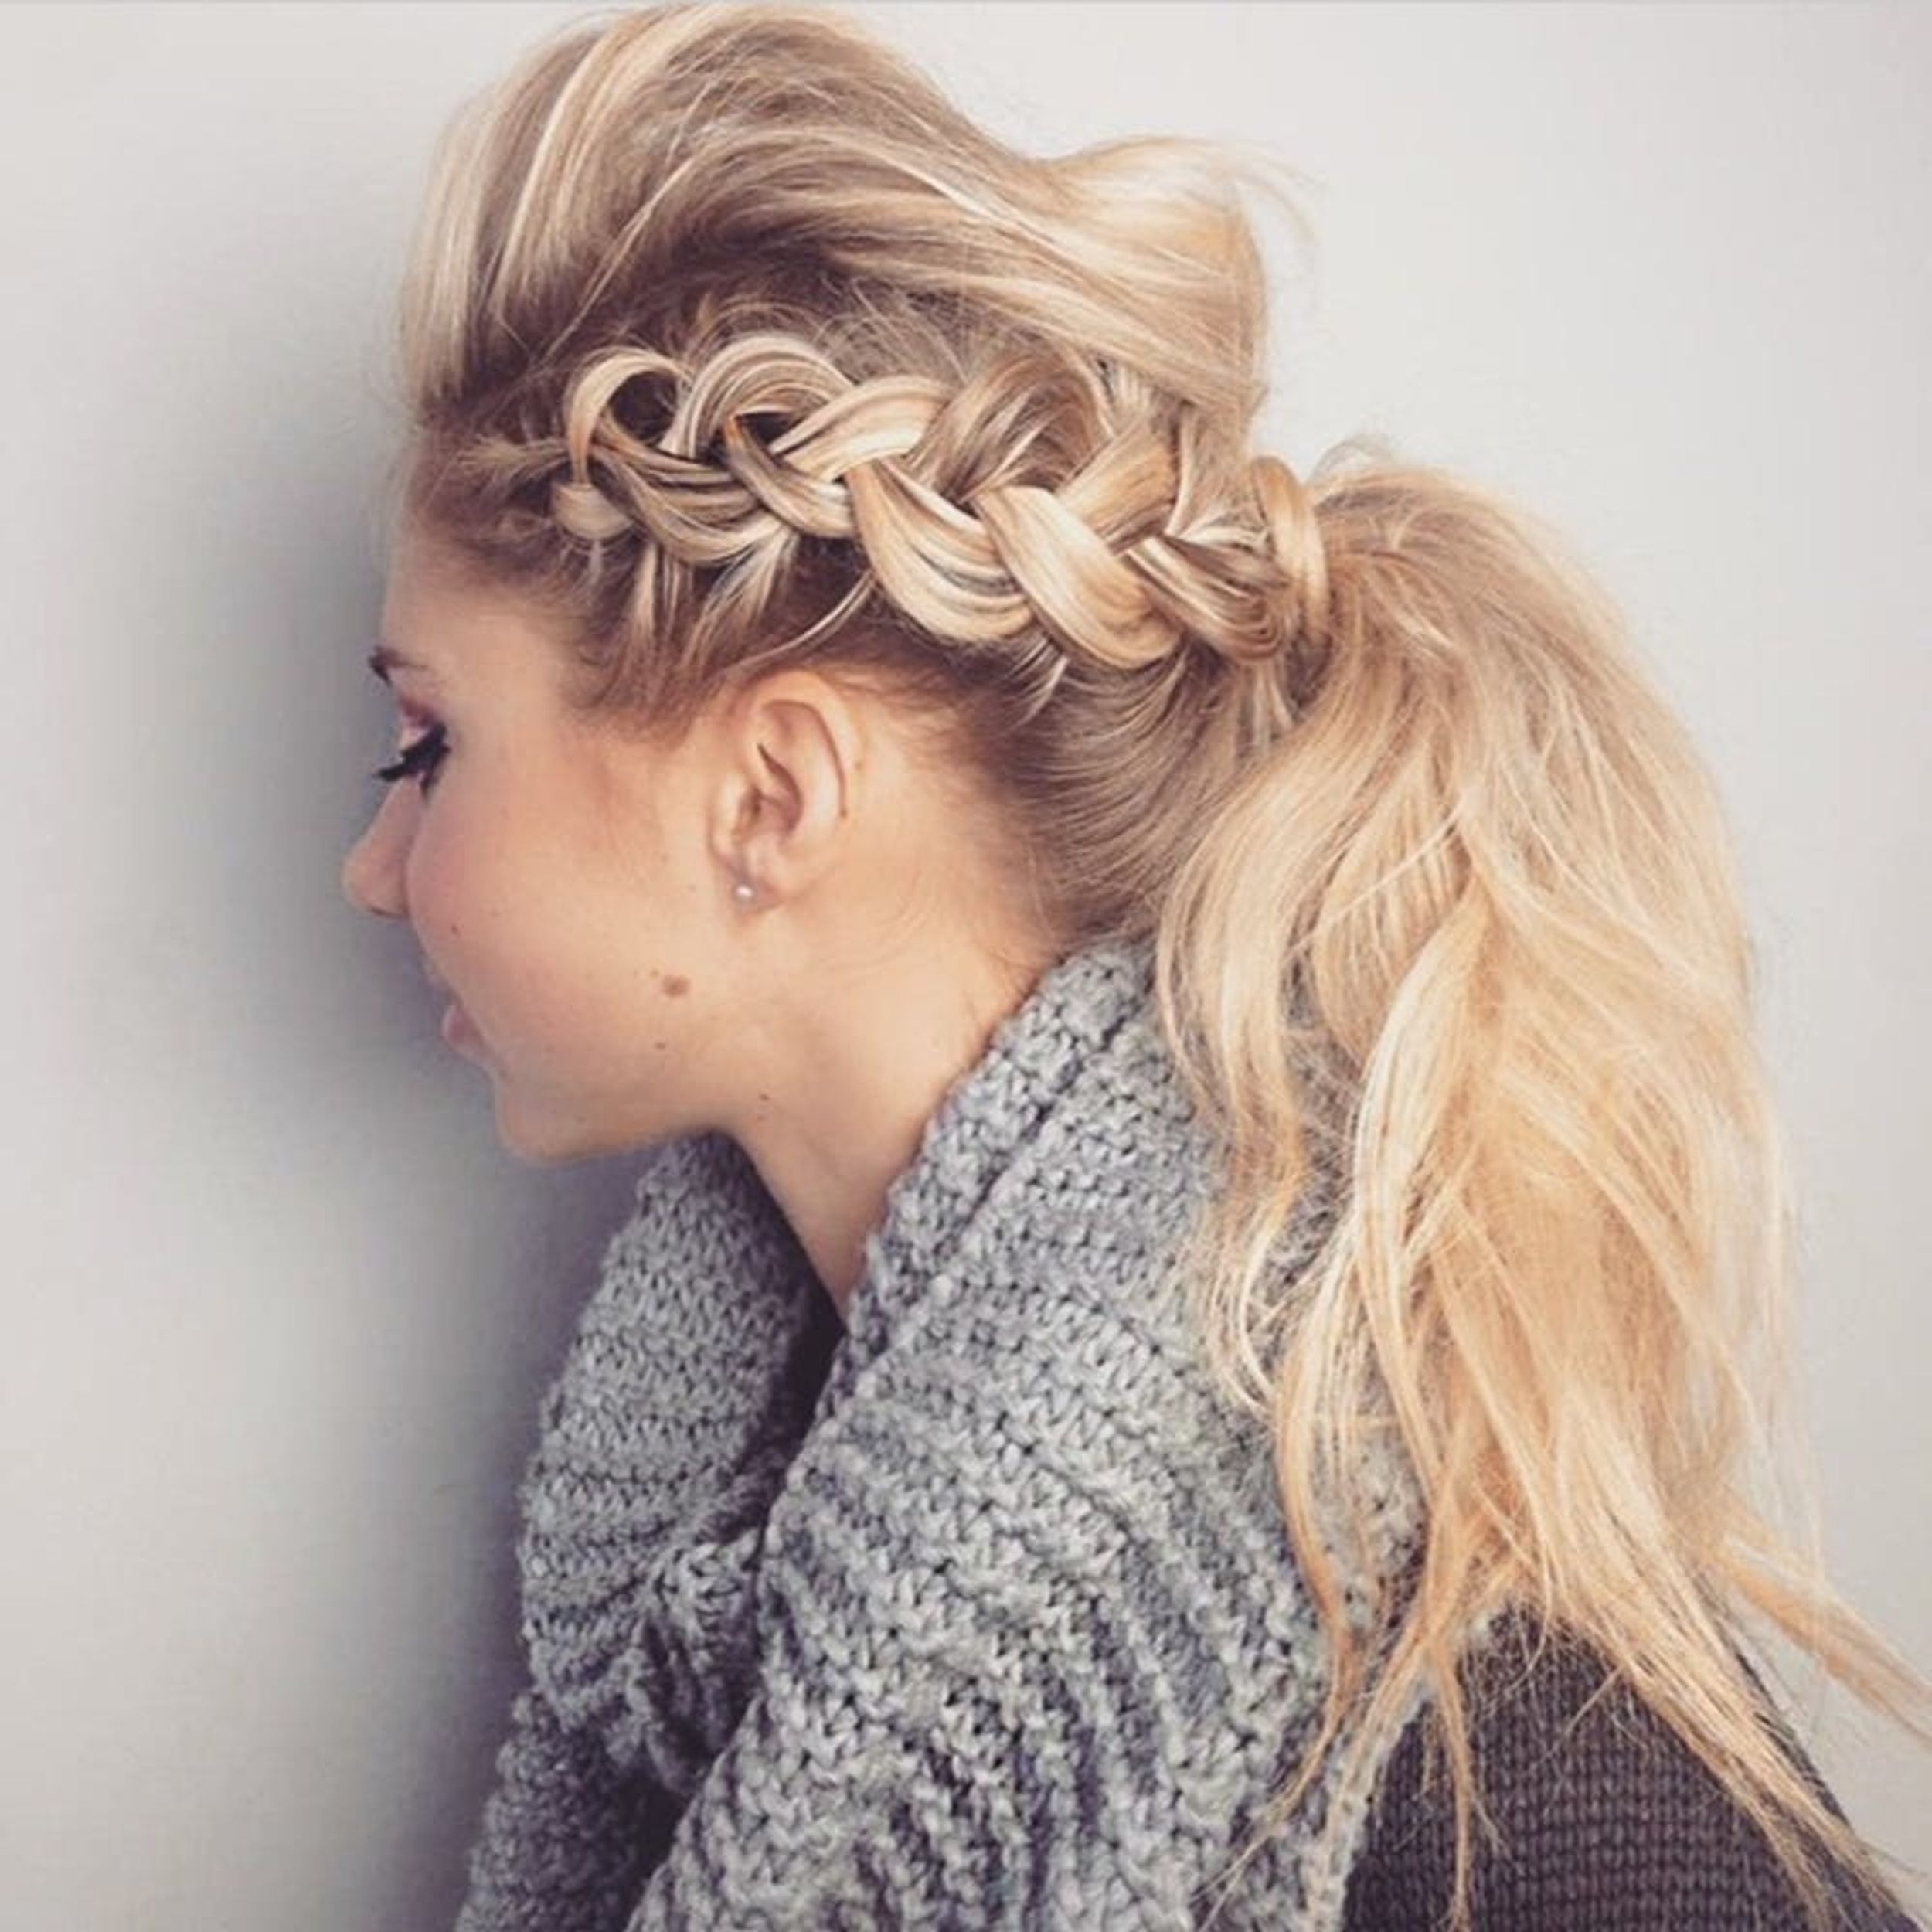 10 Instagrams to Follow for Major Hair Inspiration